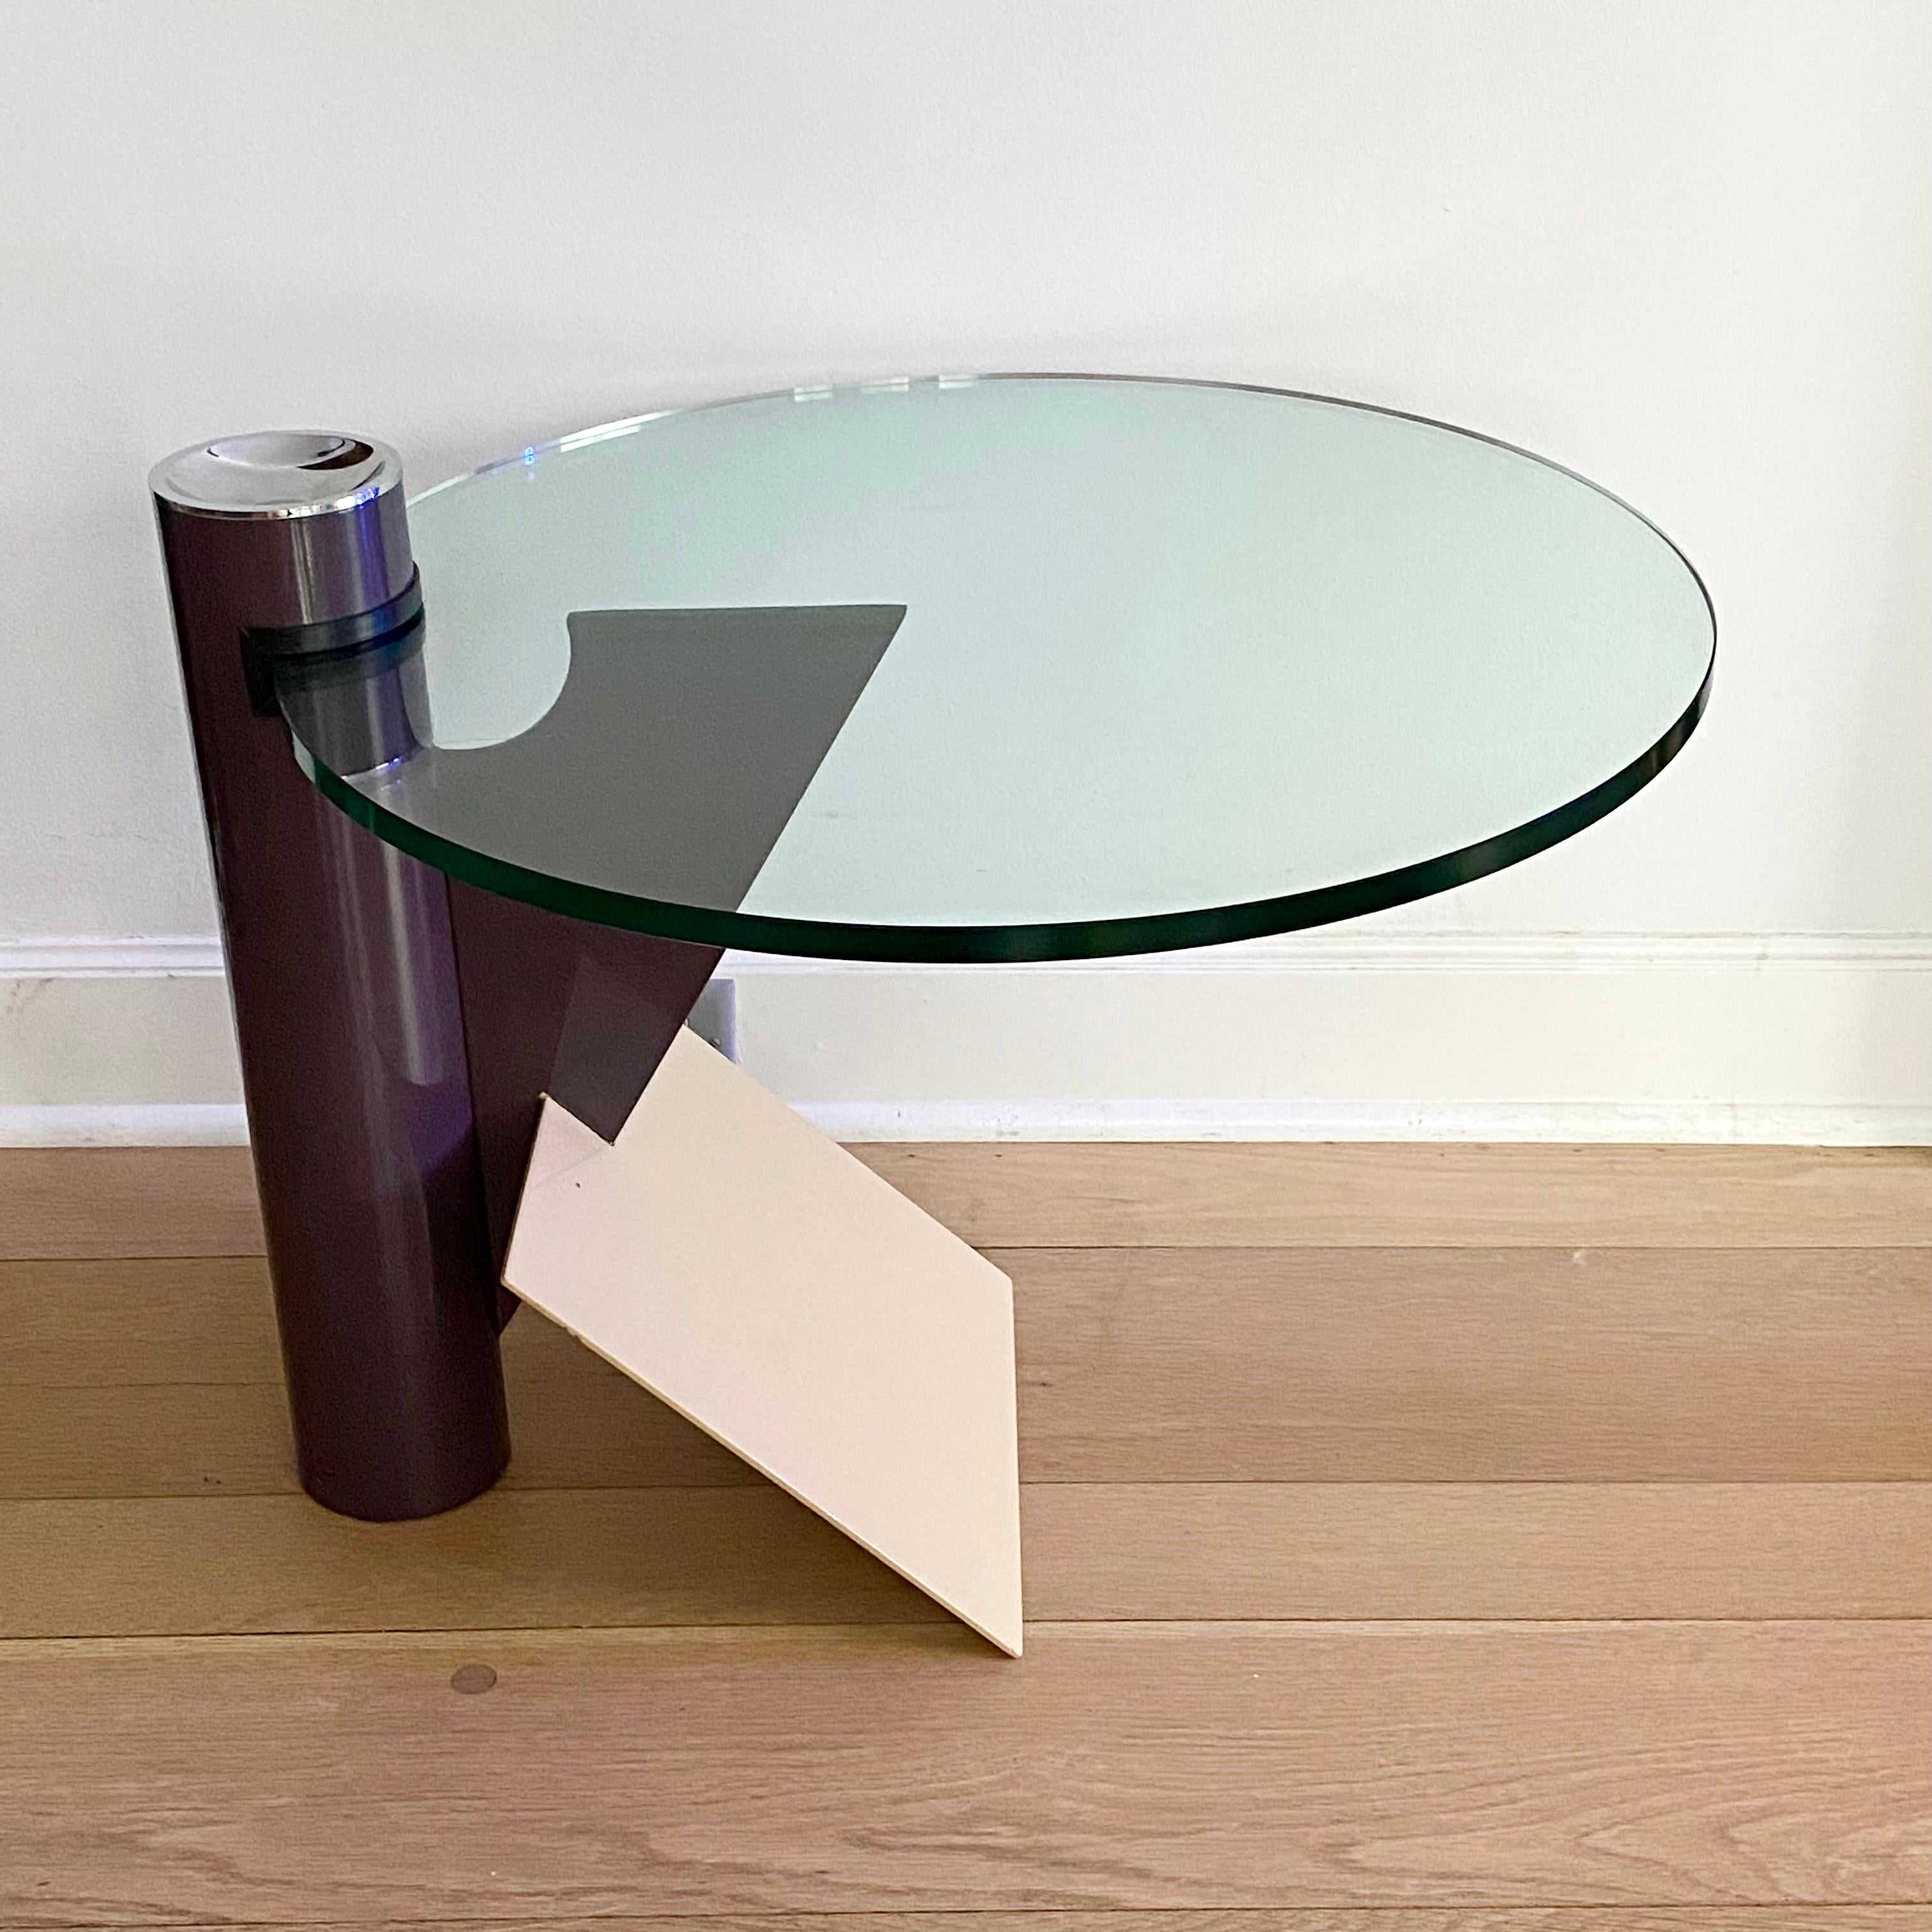 Post-modern side table designed by Memphis Milano member Peter Shire (b. 1947) for Saporiti, Italy 1983. Enameled steel, glass, rubber and chrome. Aubergine / purple base with angled tan /beige support piece. Removable chrome ashtray on top. Heavy